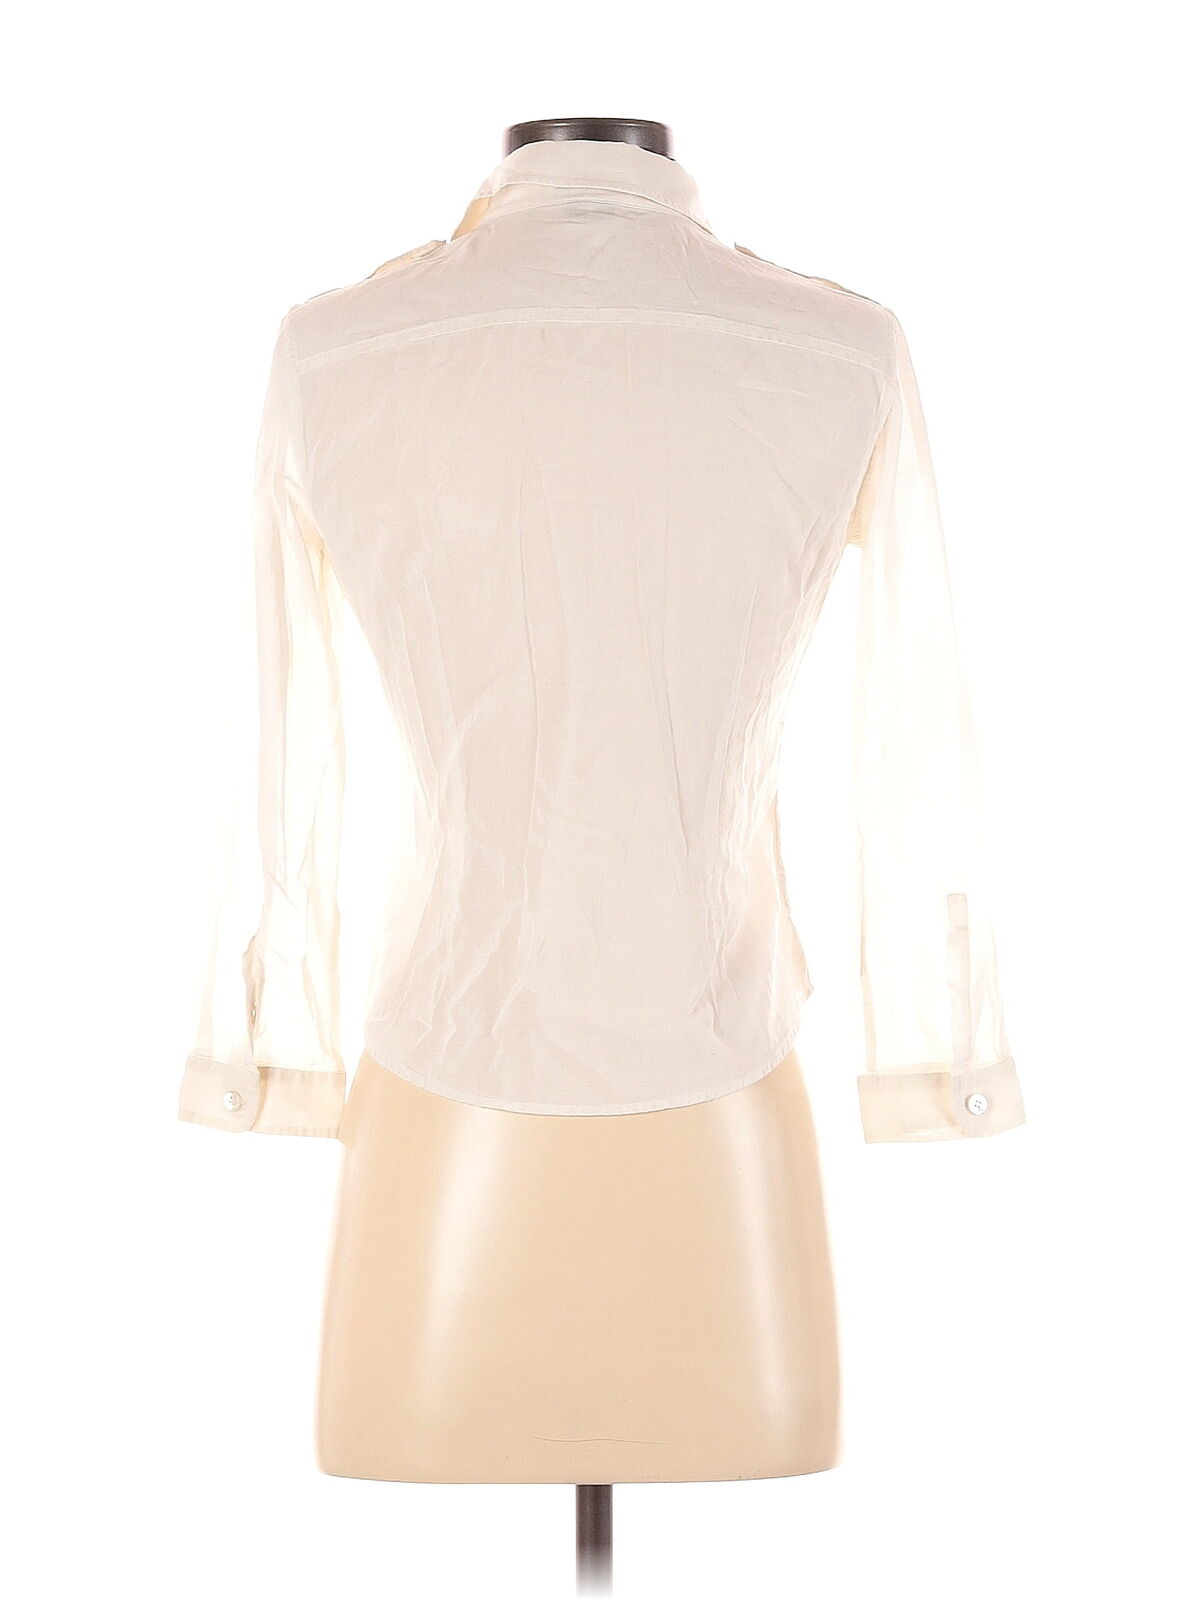 Theory Women Ivory Long Sleeve Button-Down Shirt S - image 2